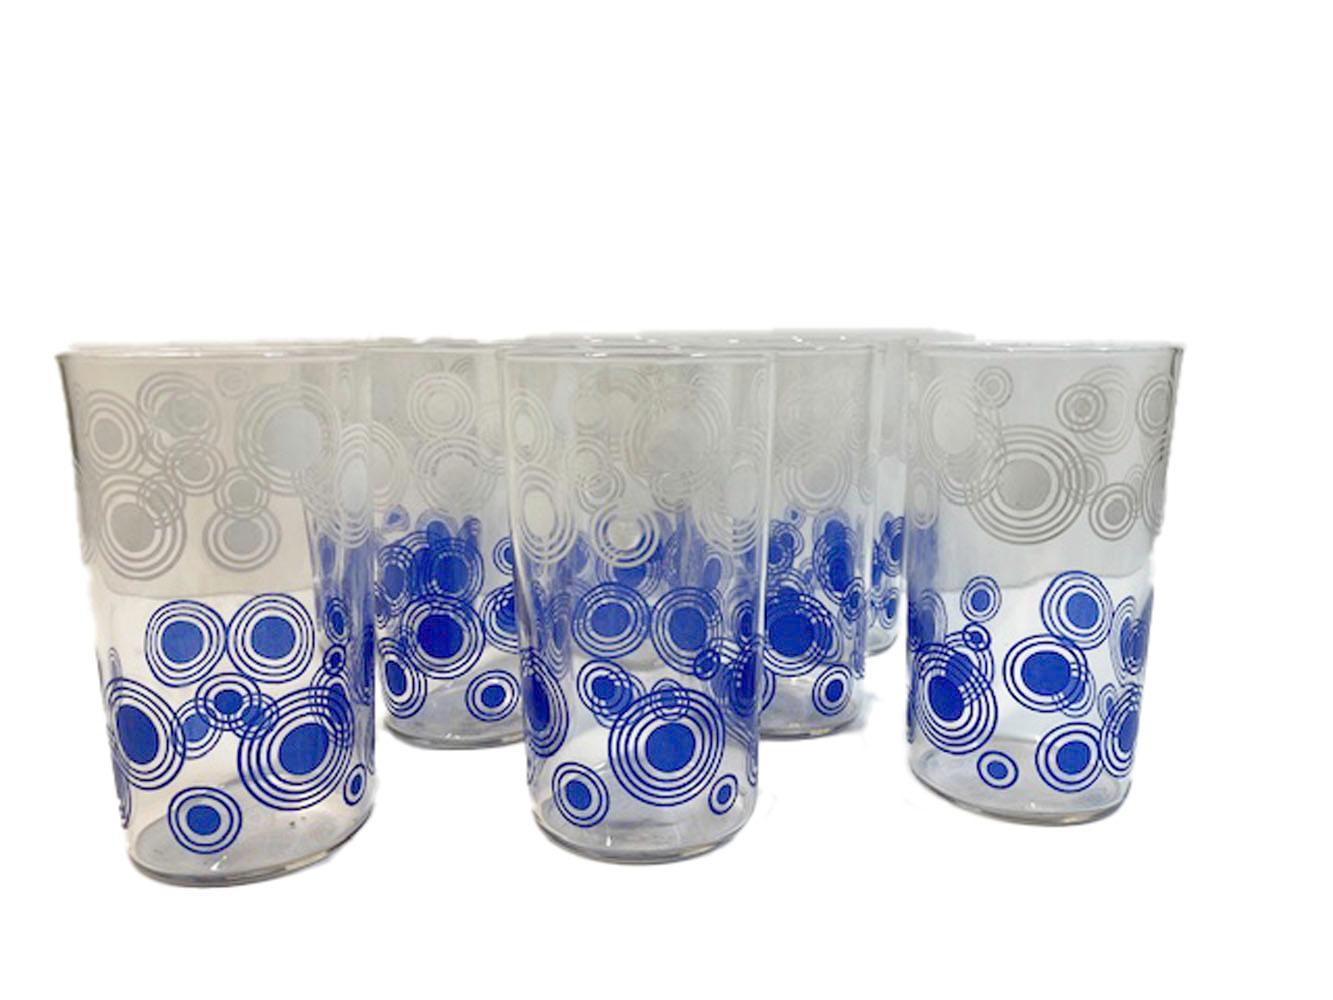 American Mid-Century Modern Tumblers Decorated in Blue and White Enamel by Libbey For Sale